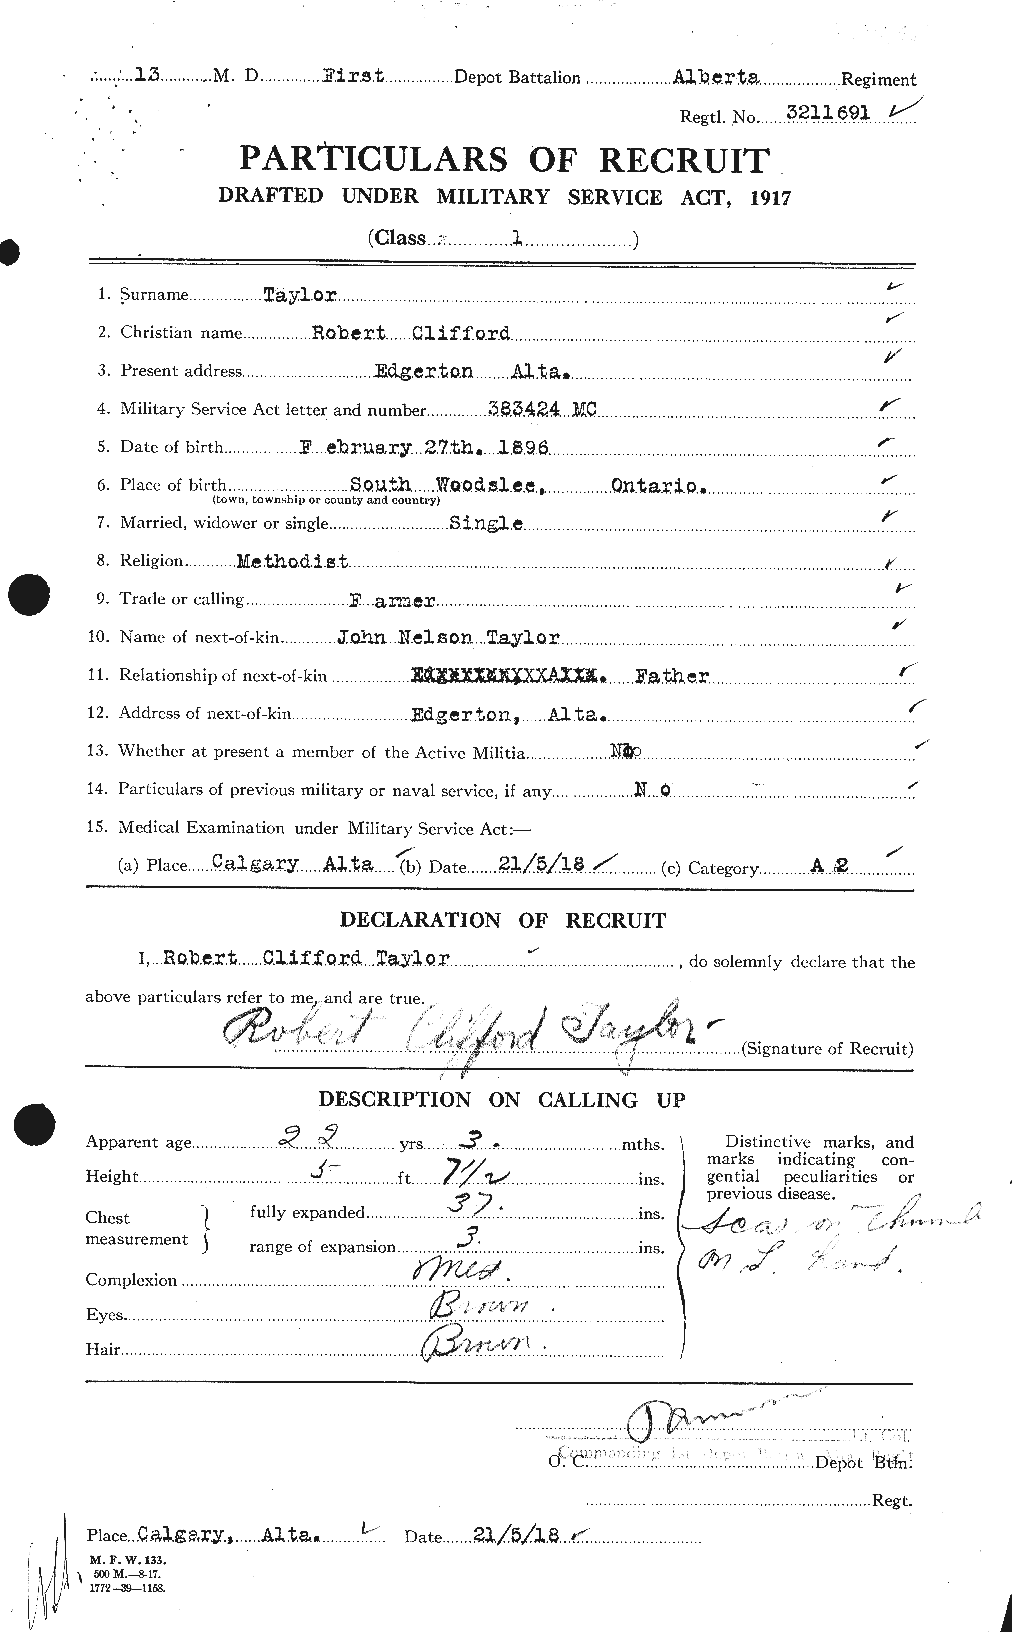 Personnel Records of the First World War - CEF 627466a